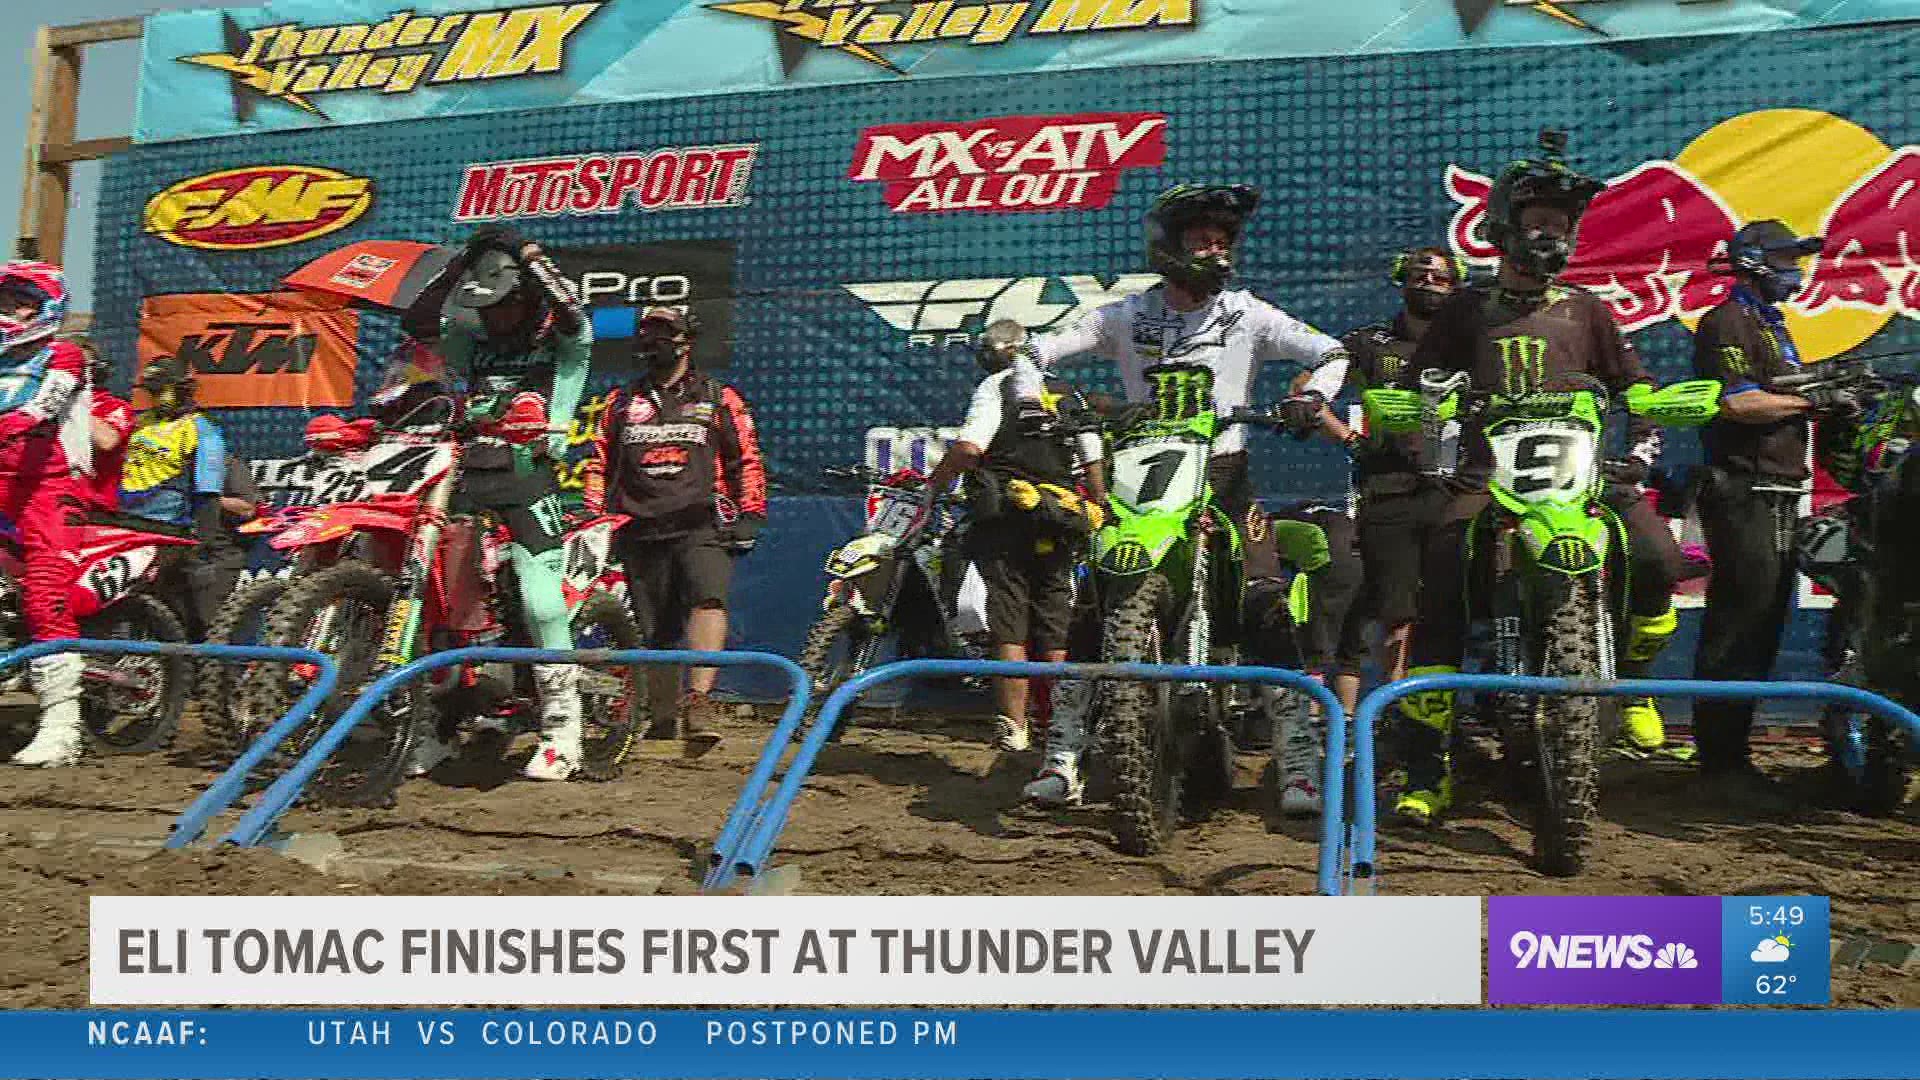 It was the 16th time the Motocross Championship Series has been in the Mile High City and the local favorite secured the overall victory.